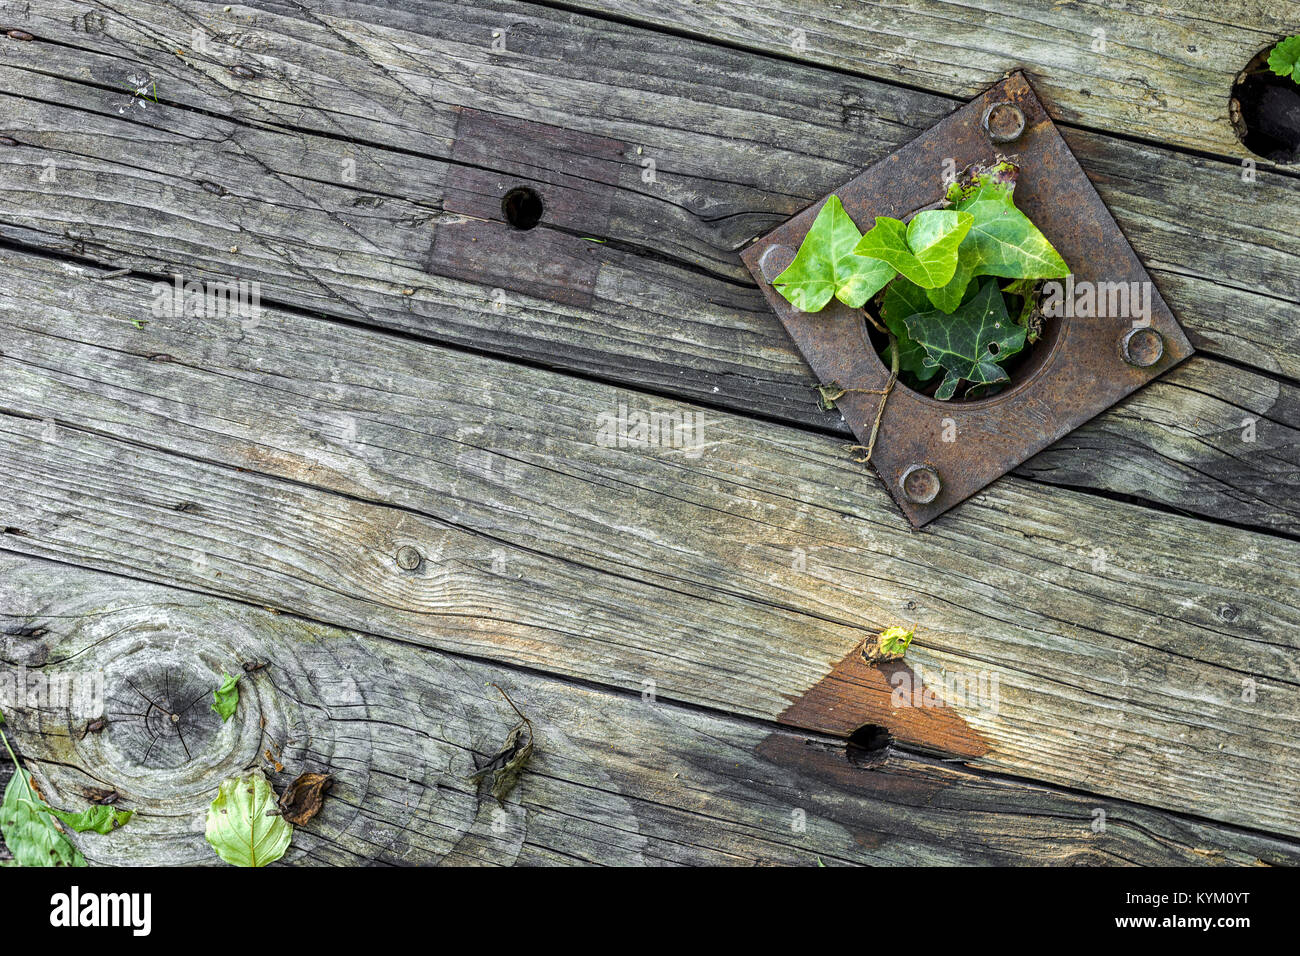 Old wooden boards with rusty metal parts and holes with some vegetation coming through Stock Photo